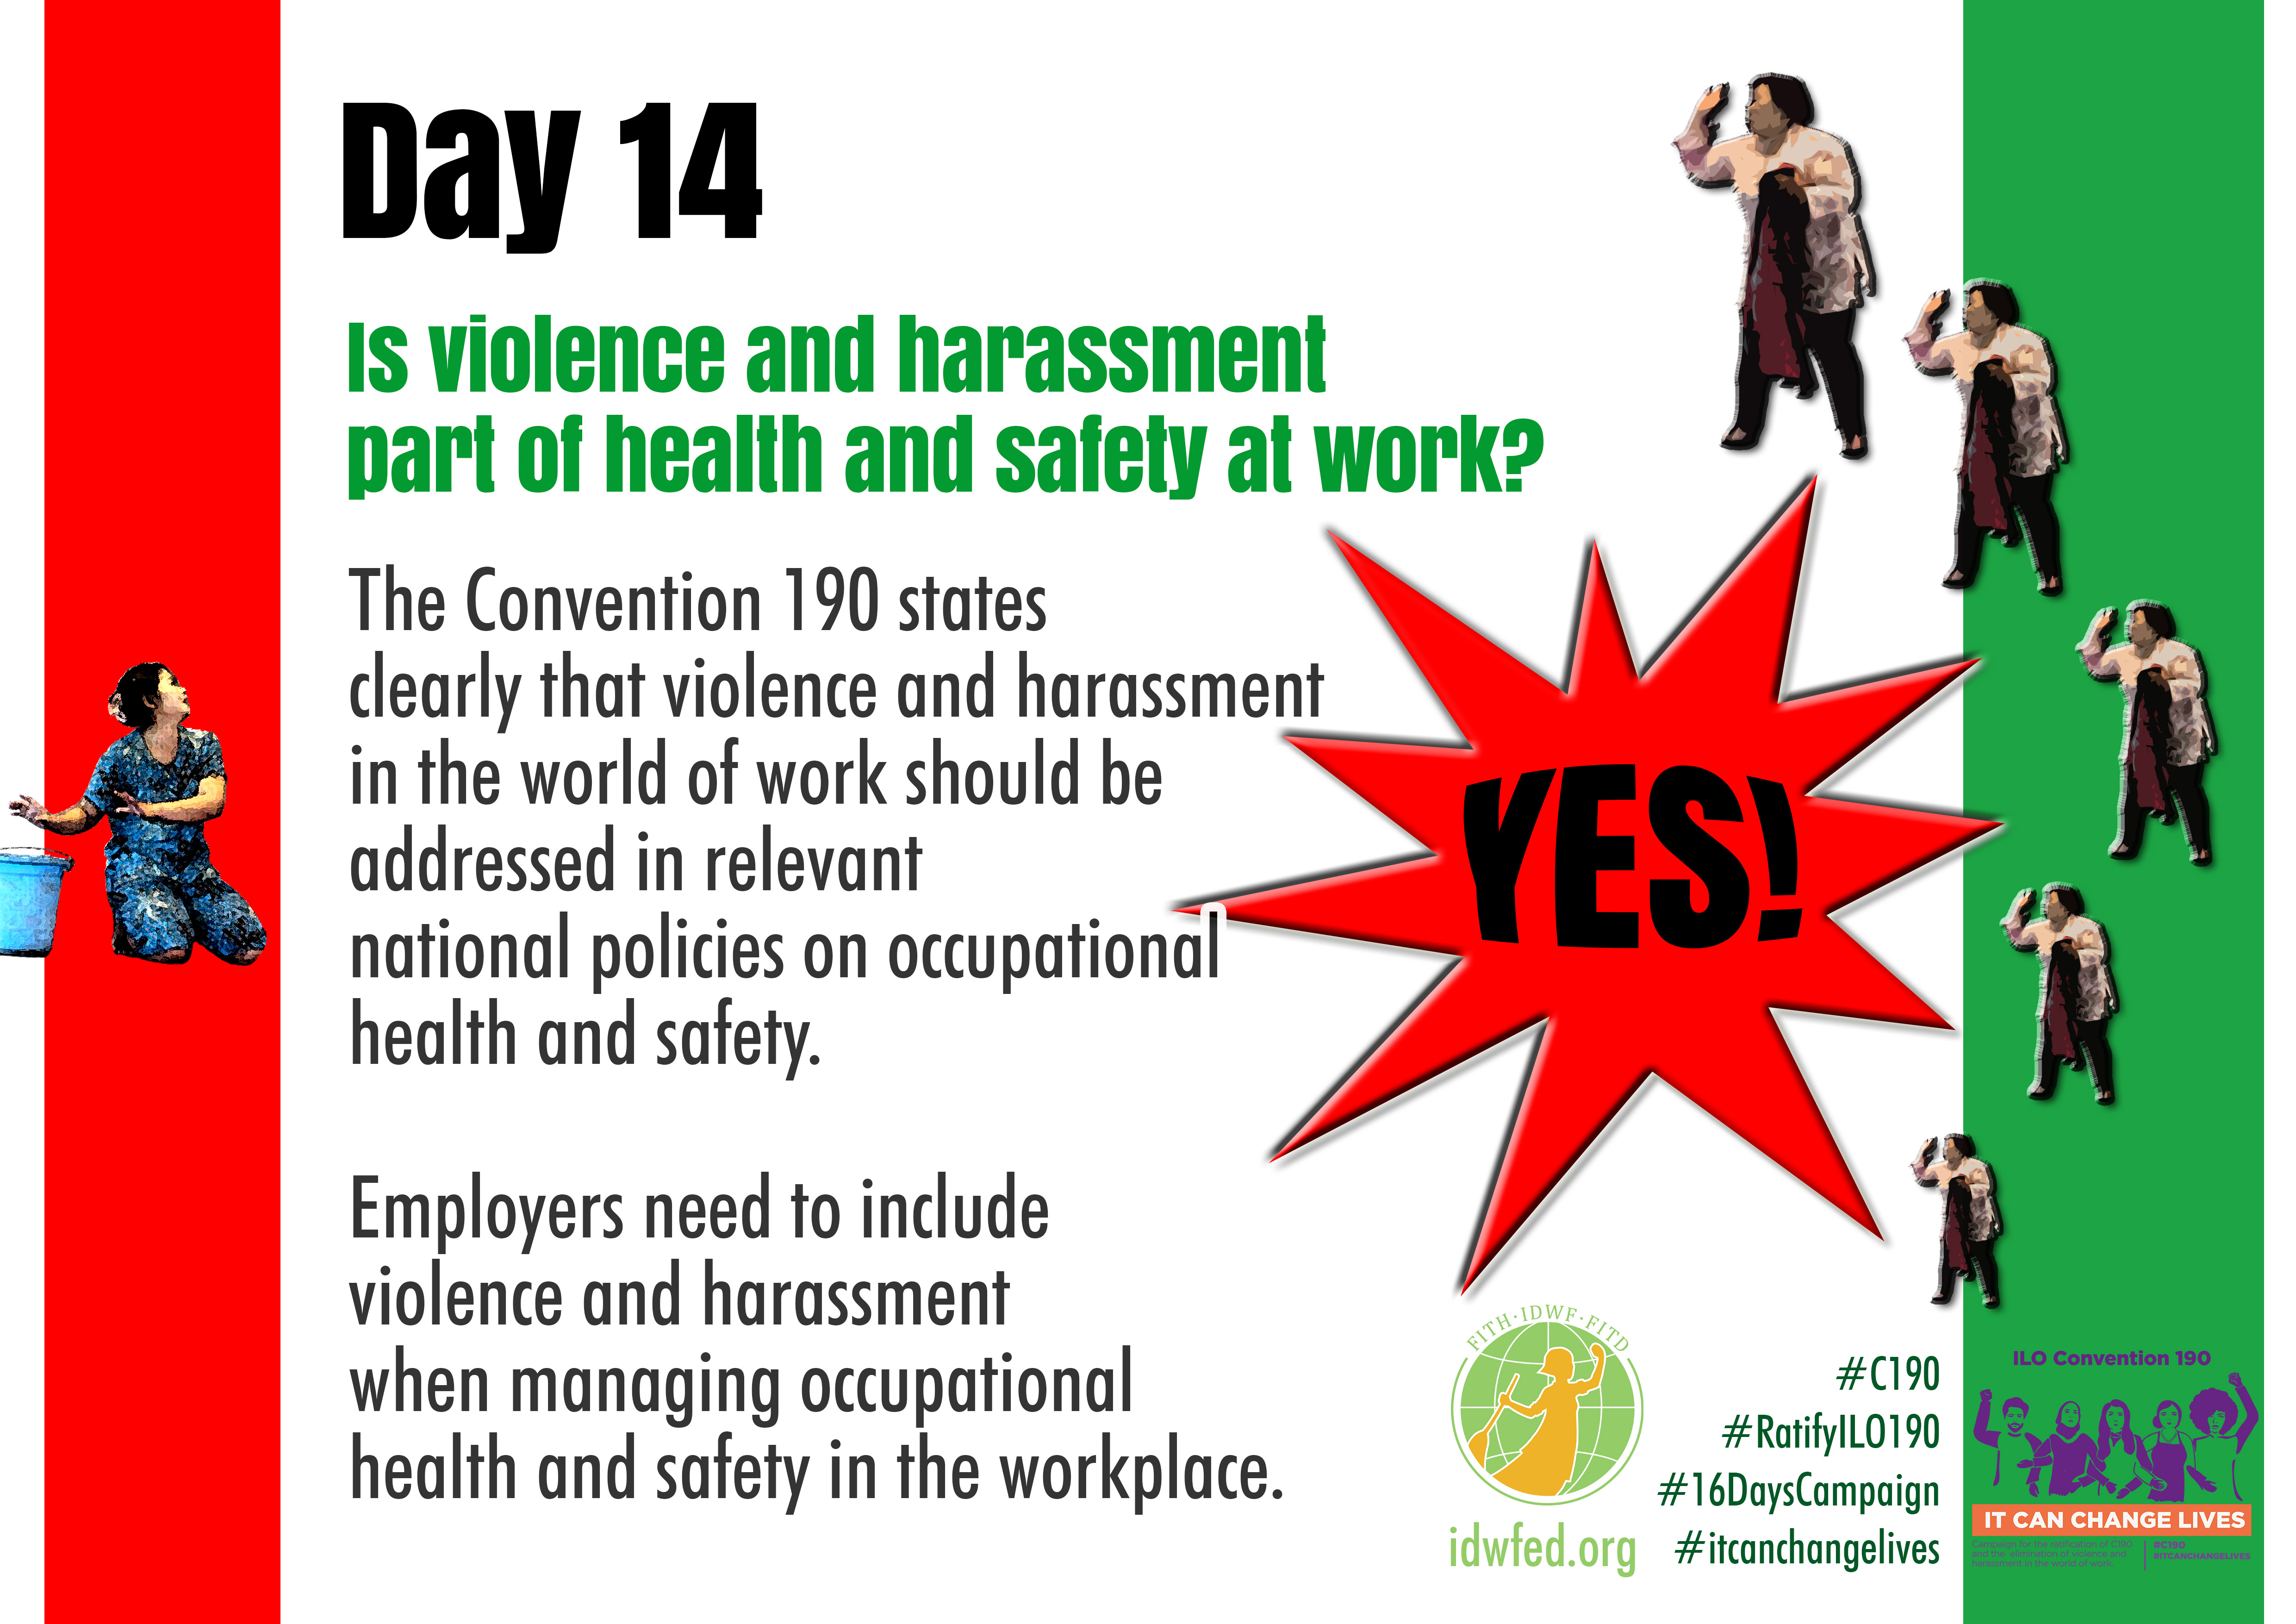 14. Is violence and harassment part of health and safety at work?